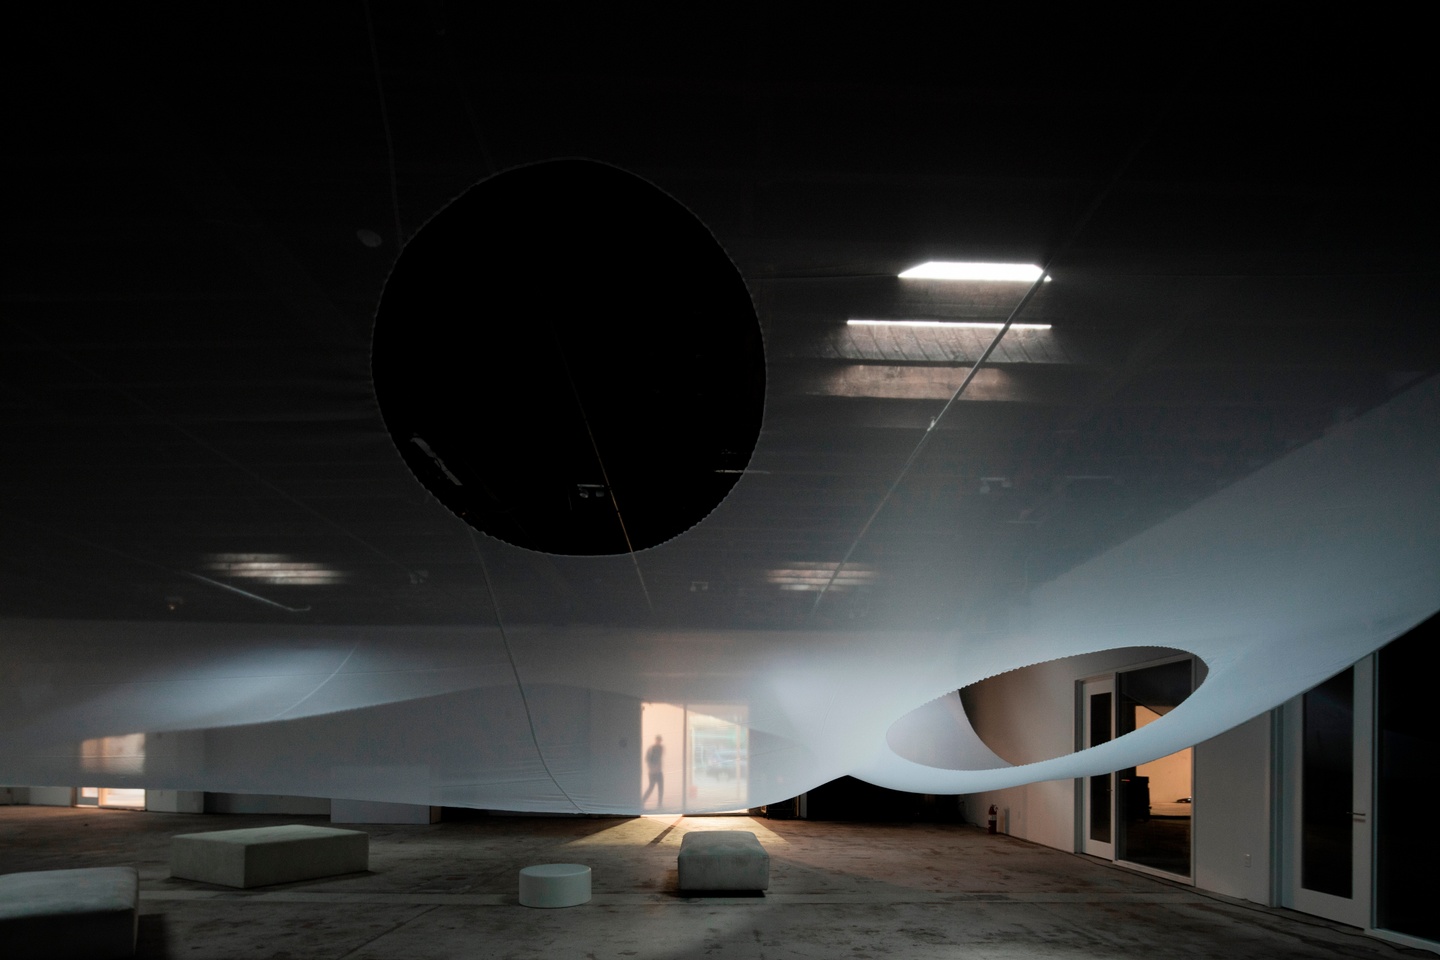 An oversize textile with a couple of large holes cut out hangs from the ceiling of an open industrial space with a few pieces of minimalist furniture on the ground.